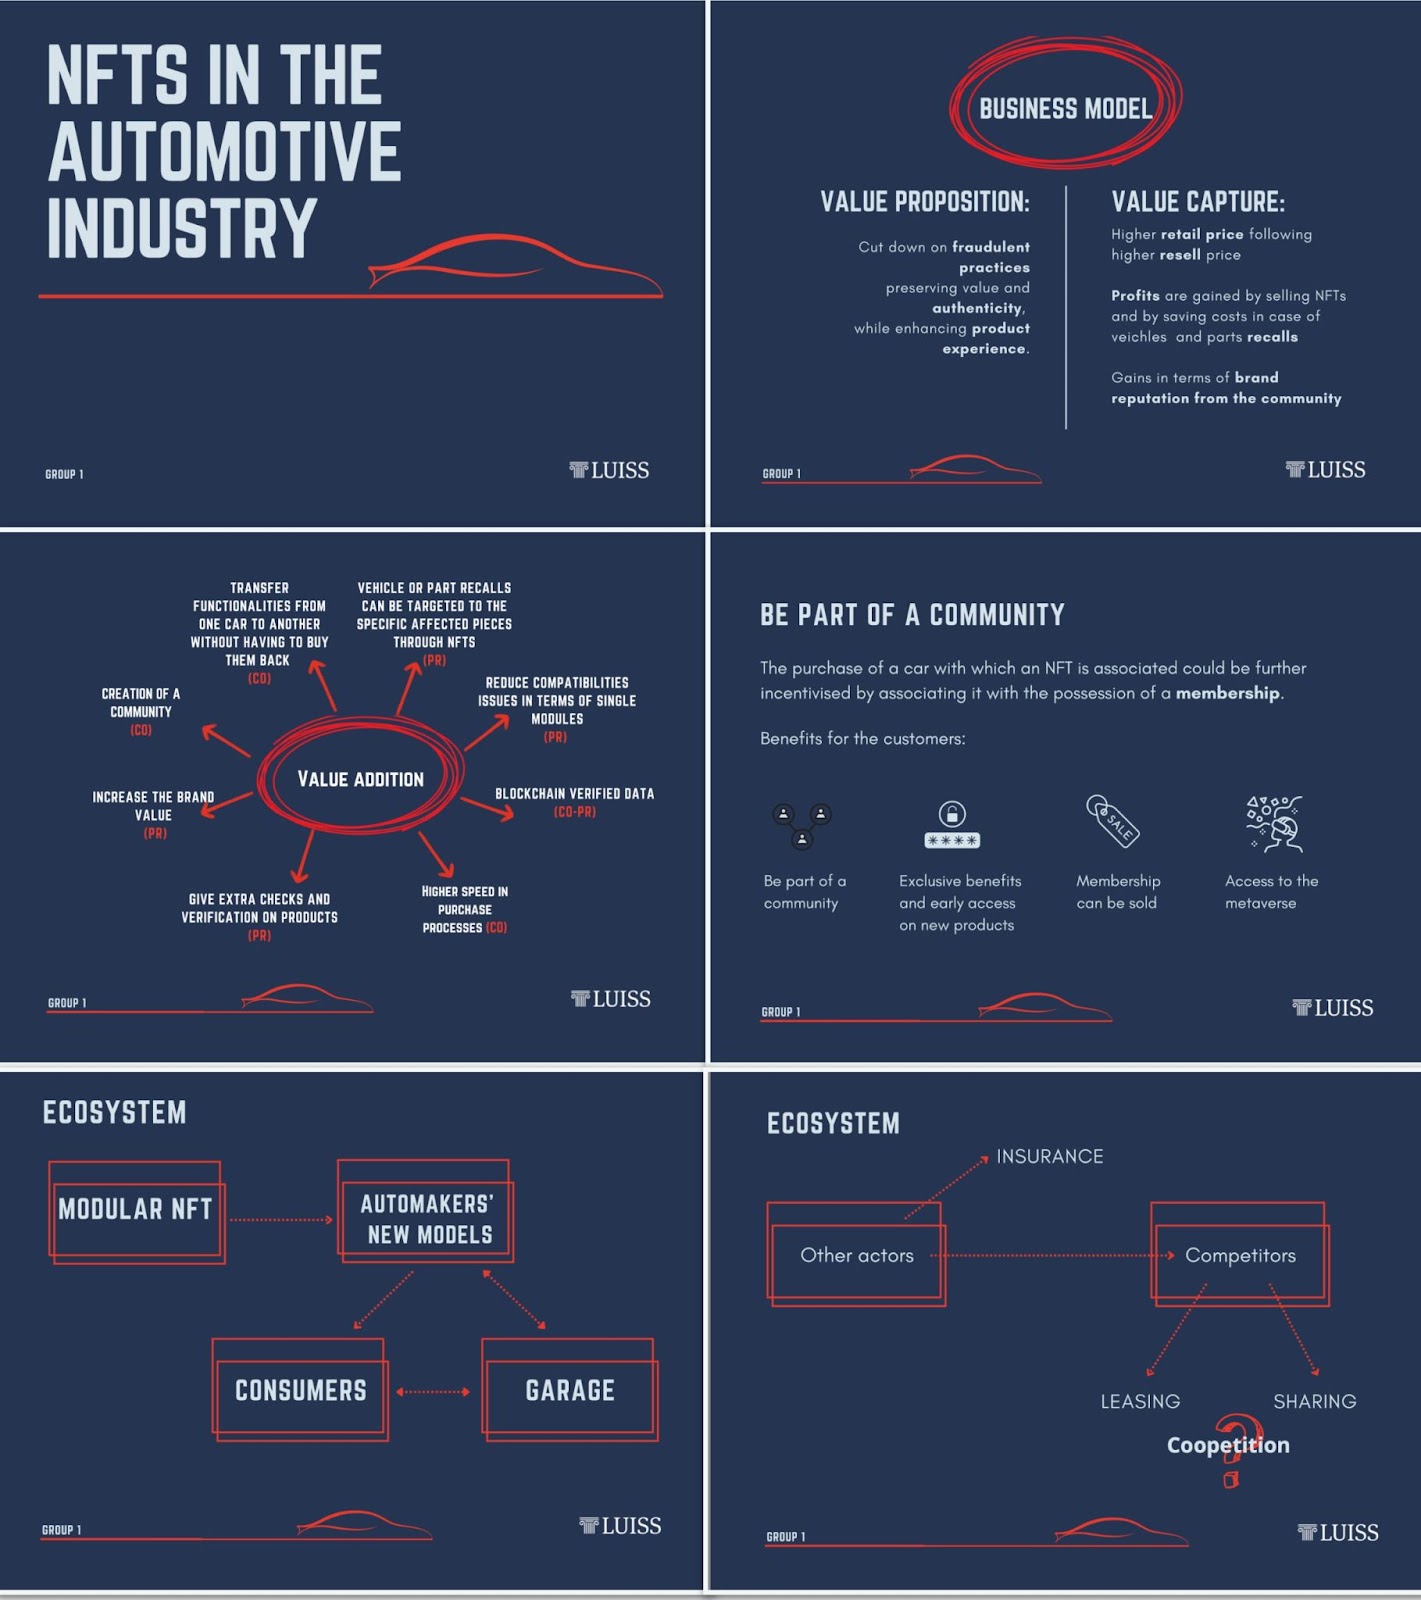  Infographic titled "NFTs in the Automotive Industry" by LUISS, explaining the ecosystem, business model, and value addition of NFTs in the sector, including value proposition, community aspects, and the roles of consumers, garages, automakers, insurance, and other actors.